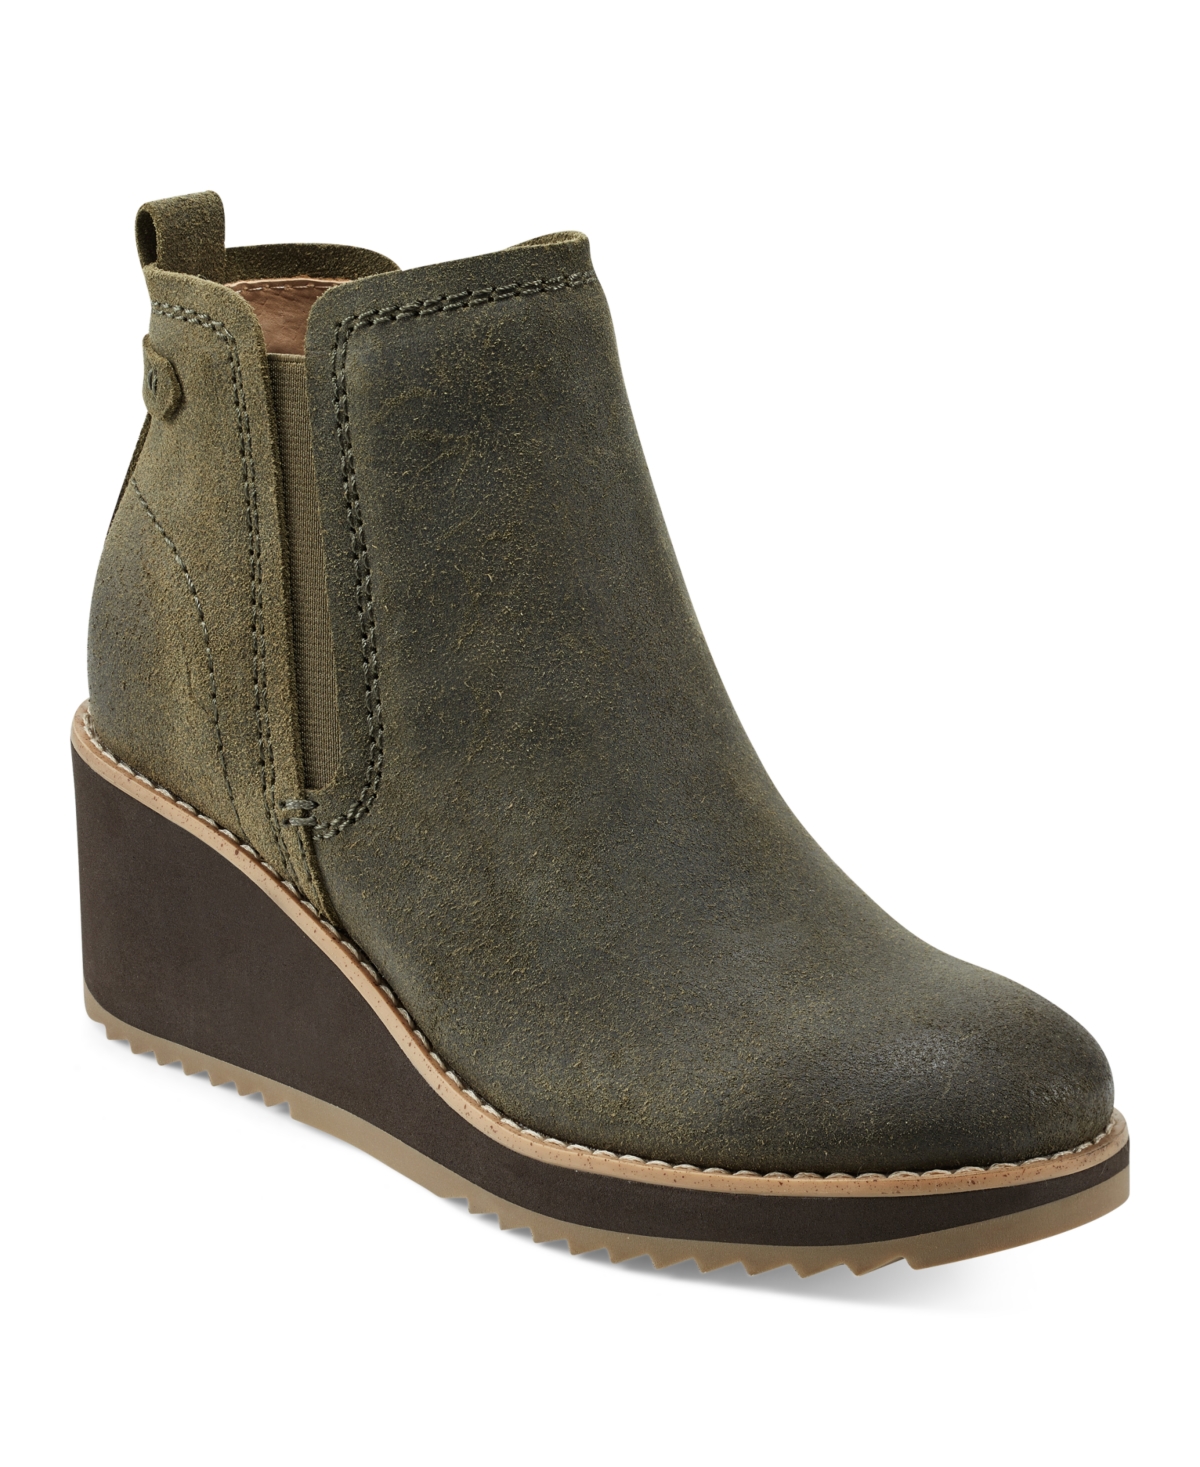 Earth Women's Cleia Slip-on Round Toe Casual Wedge Booties In Dark Green Suede